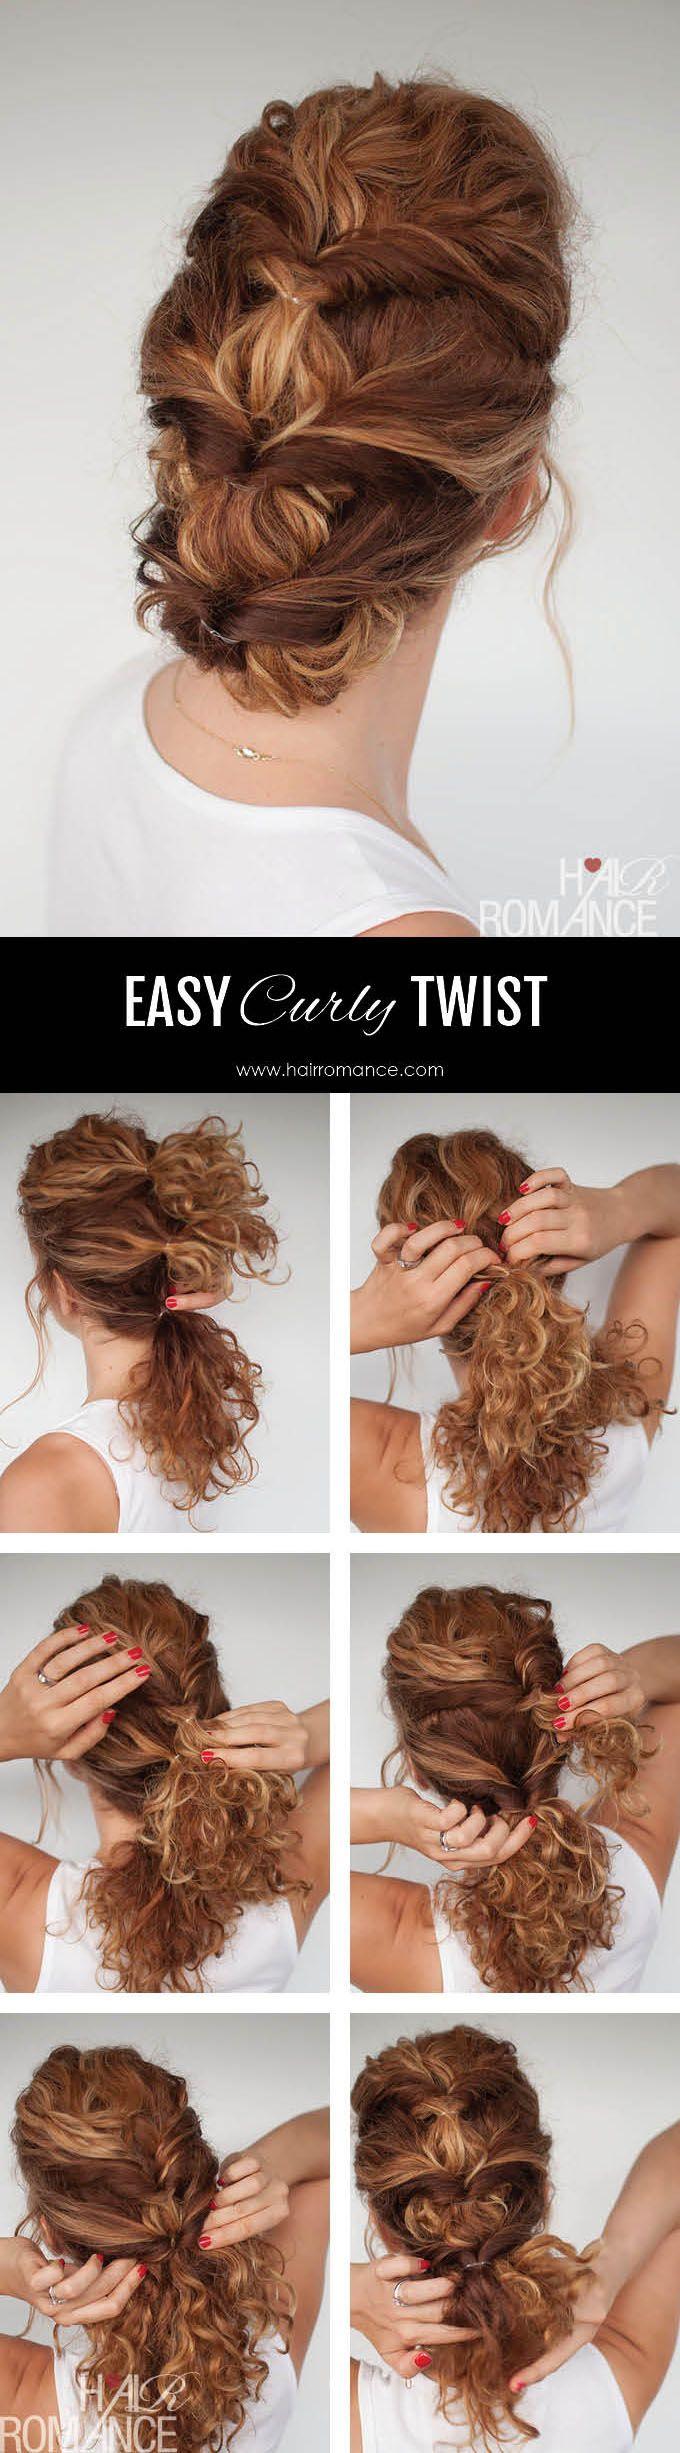 Hochzeit - Easy Everyday Curly Hairstyle Tutorial - The Curly Twist